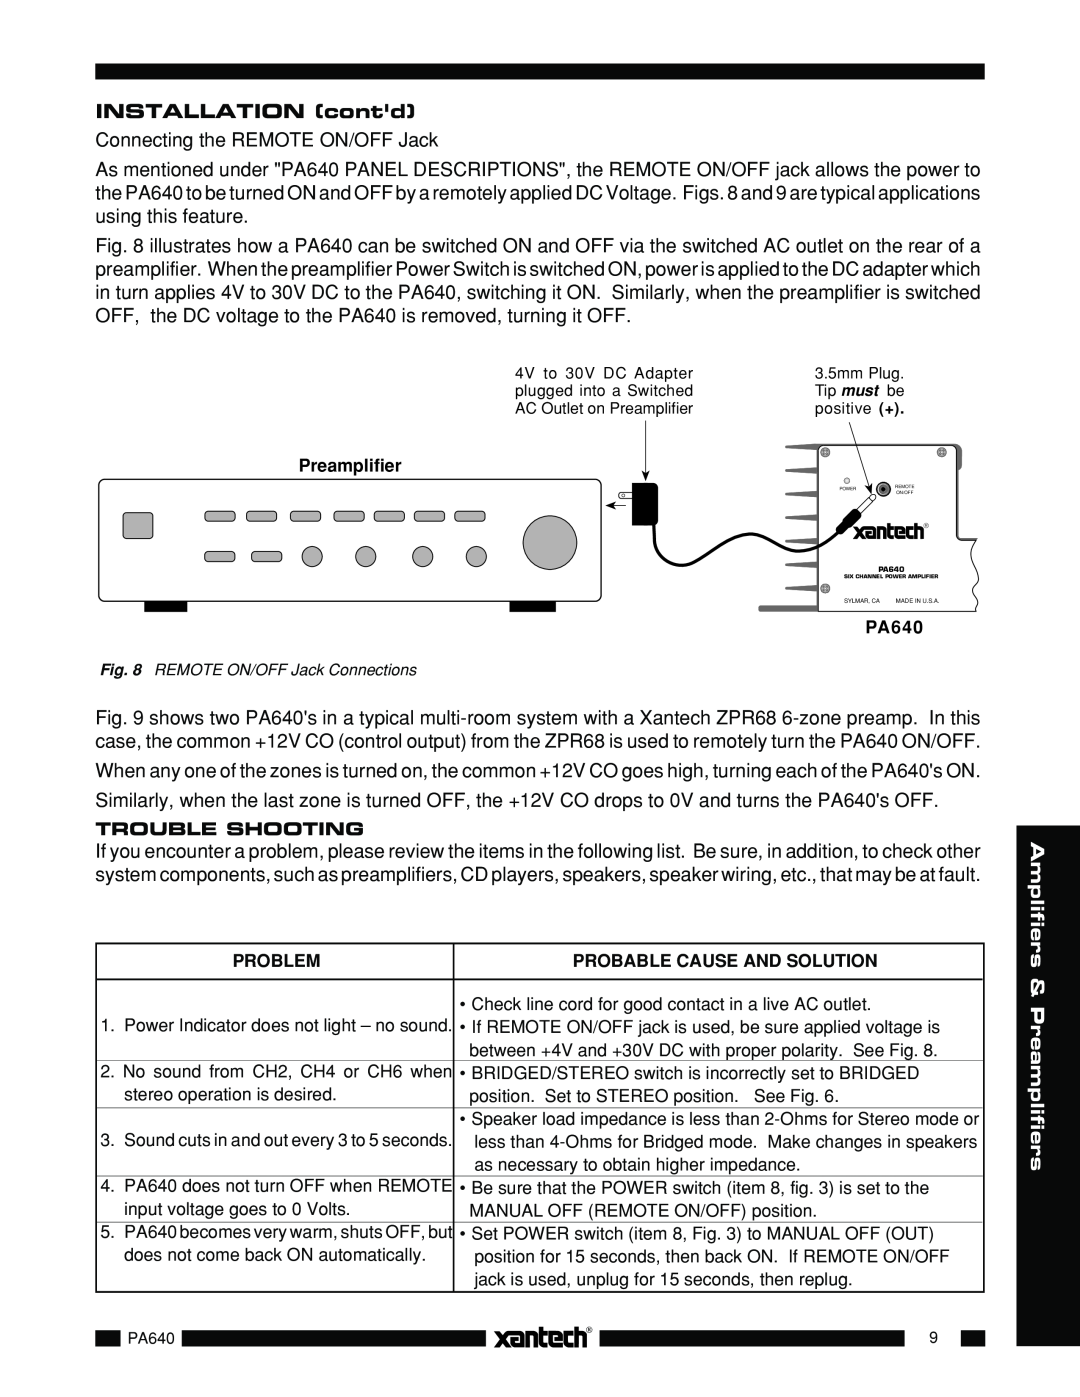 Xantech PA640 installation instructions INSTALLATION contd, Connecting the REMOTE ON/OFF Jack 